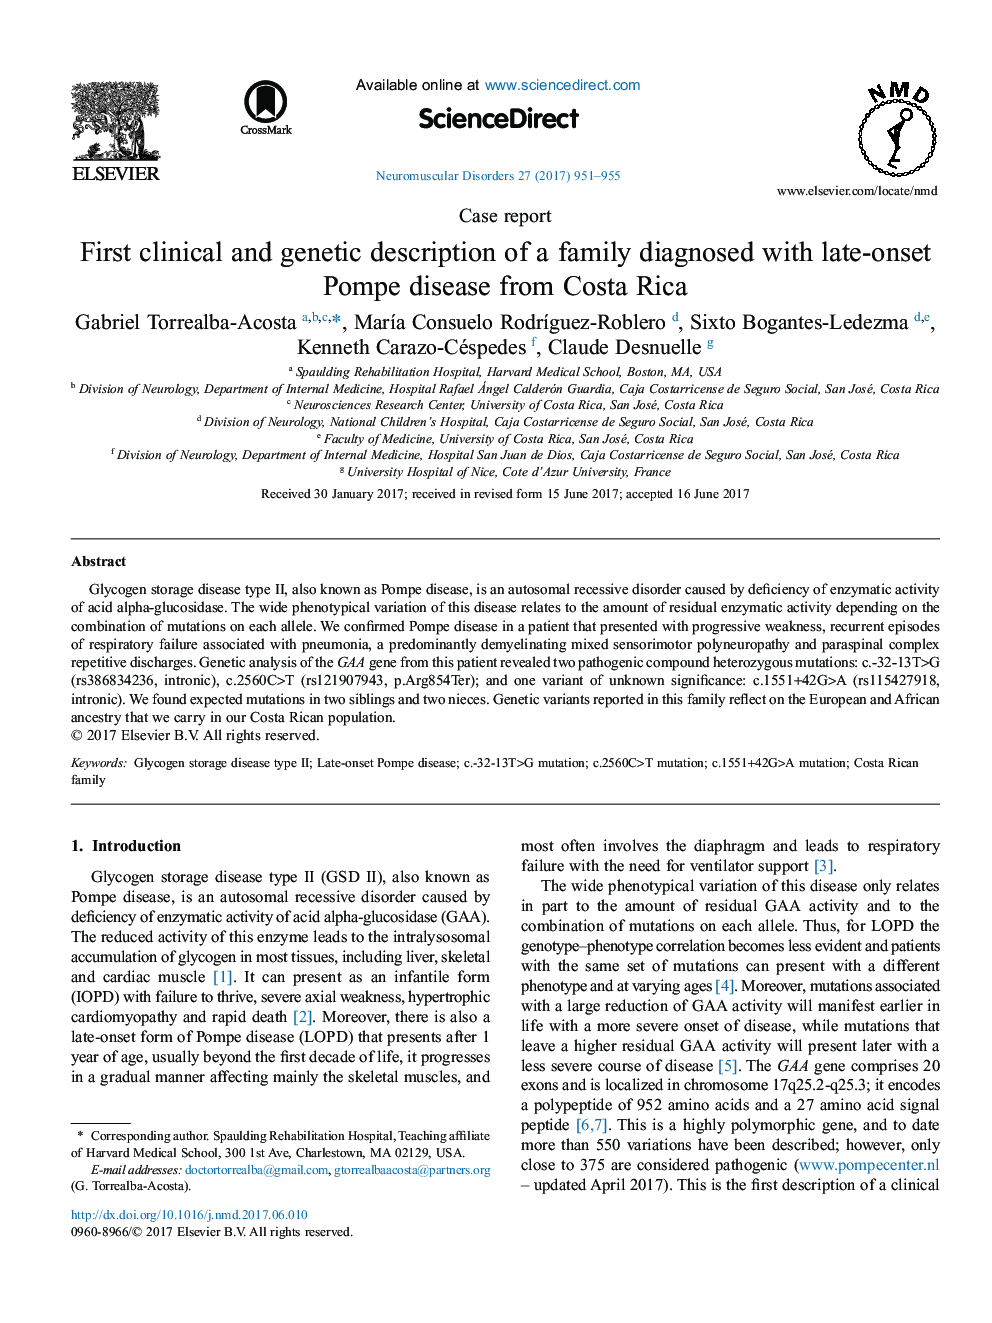 Case reportFirst clinical and genetic description of a family diagnosed with late-onset Pompe disease from Costa Rica